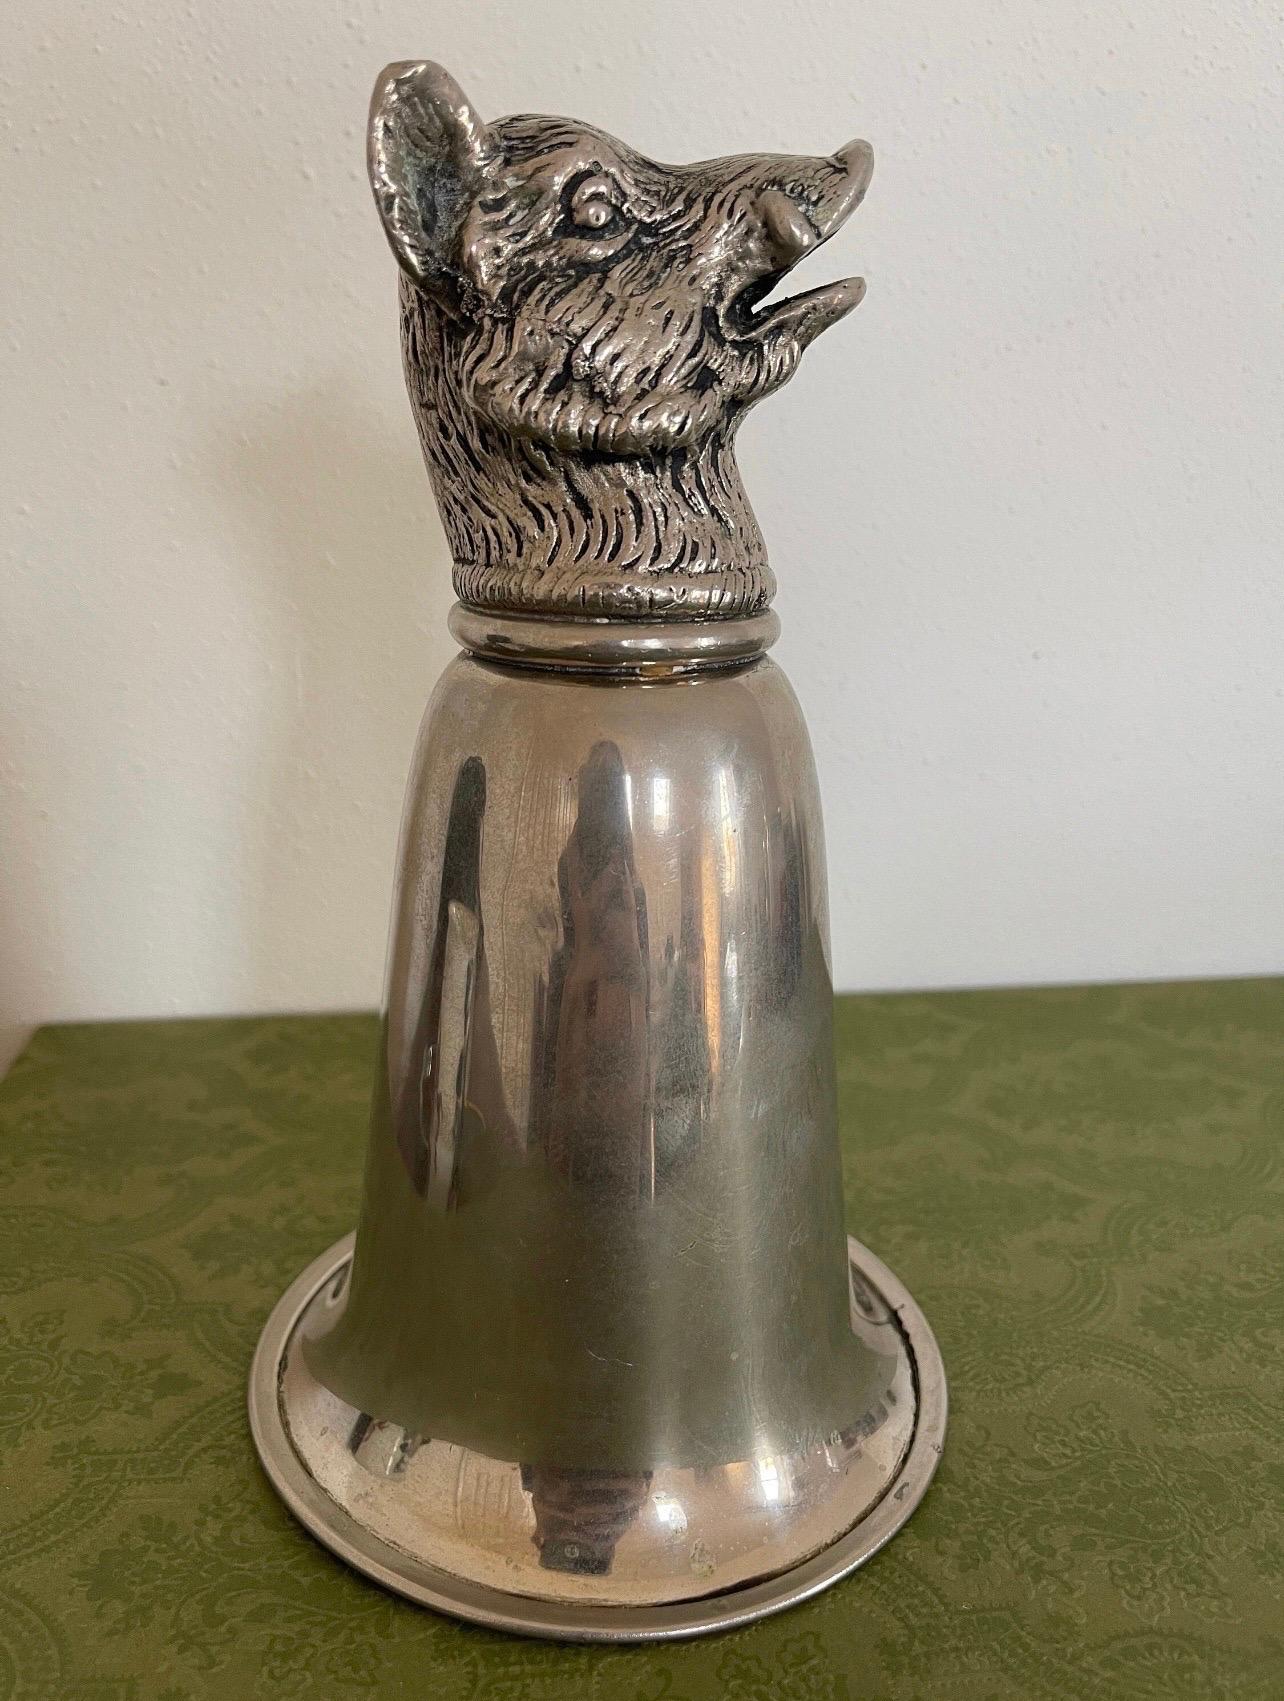 🖤 Collectors Dream 🖤

Authentic Vintage Gucci boar head silver stirrup cup. Circa 1970’s this stunning cup is made of pewter and brass and features a sculptured boar. Very cool and striking piece to add to your bar, library or anywhere you want to